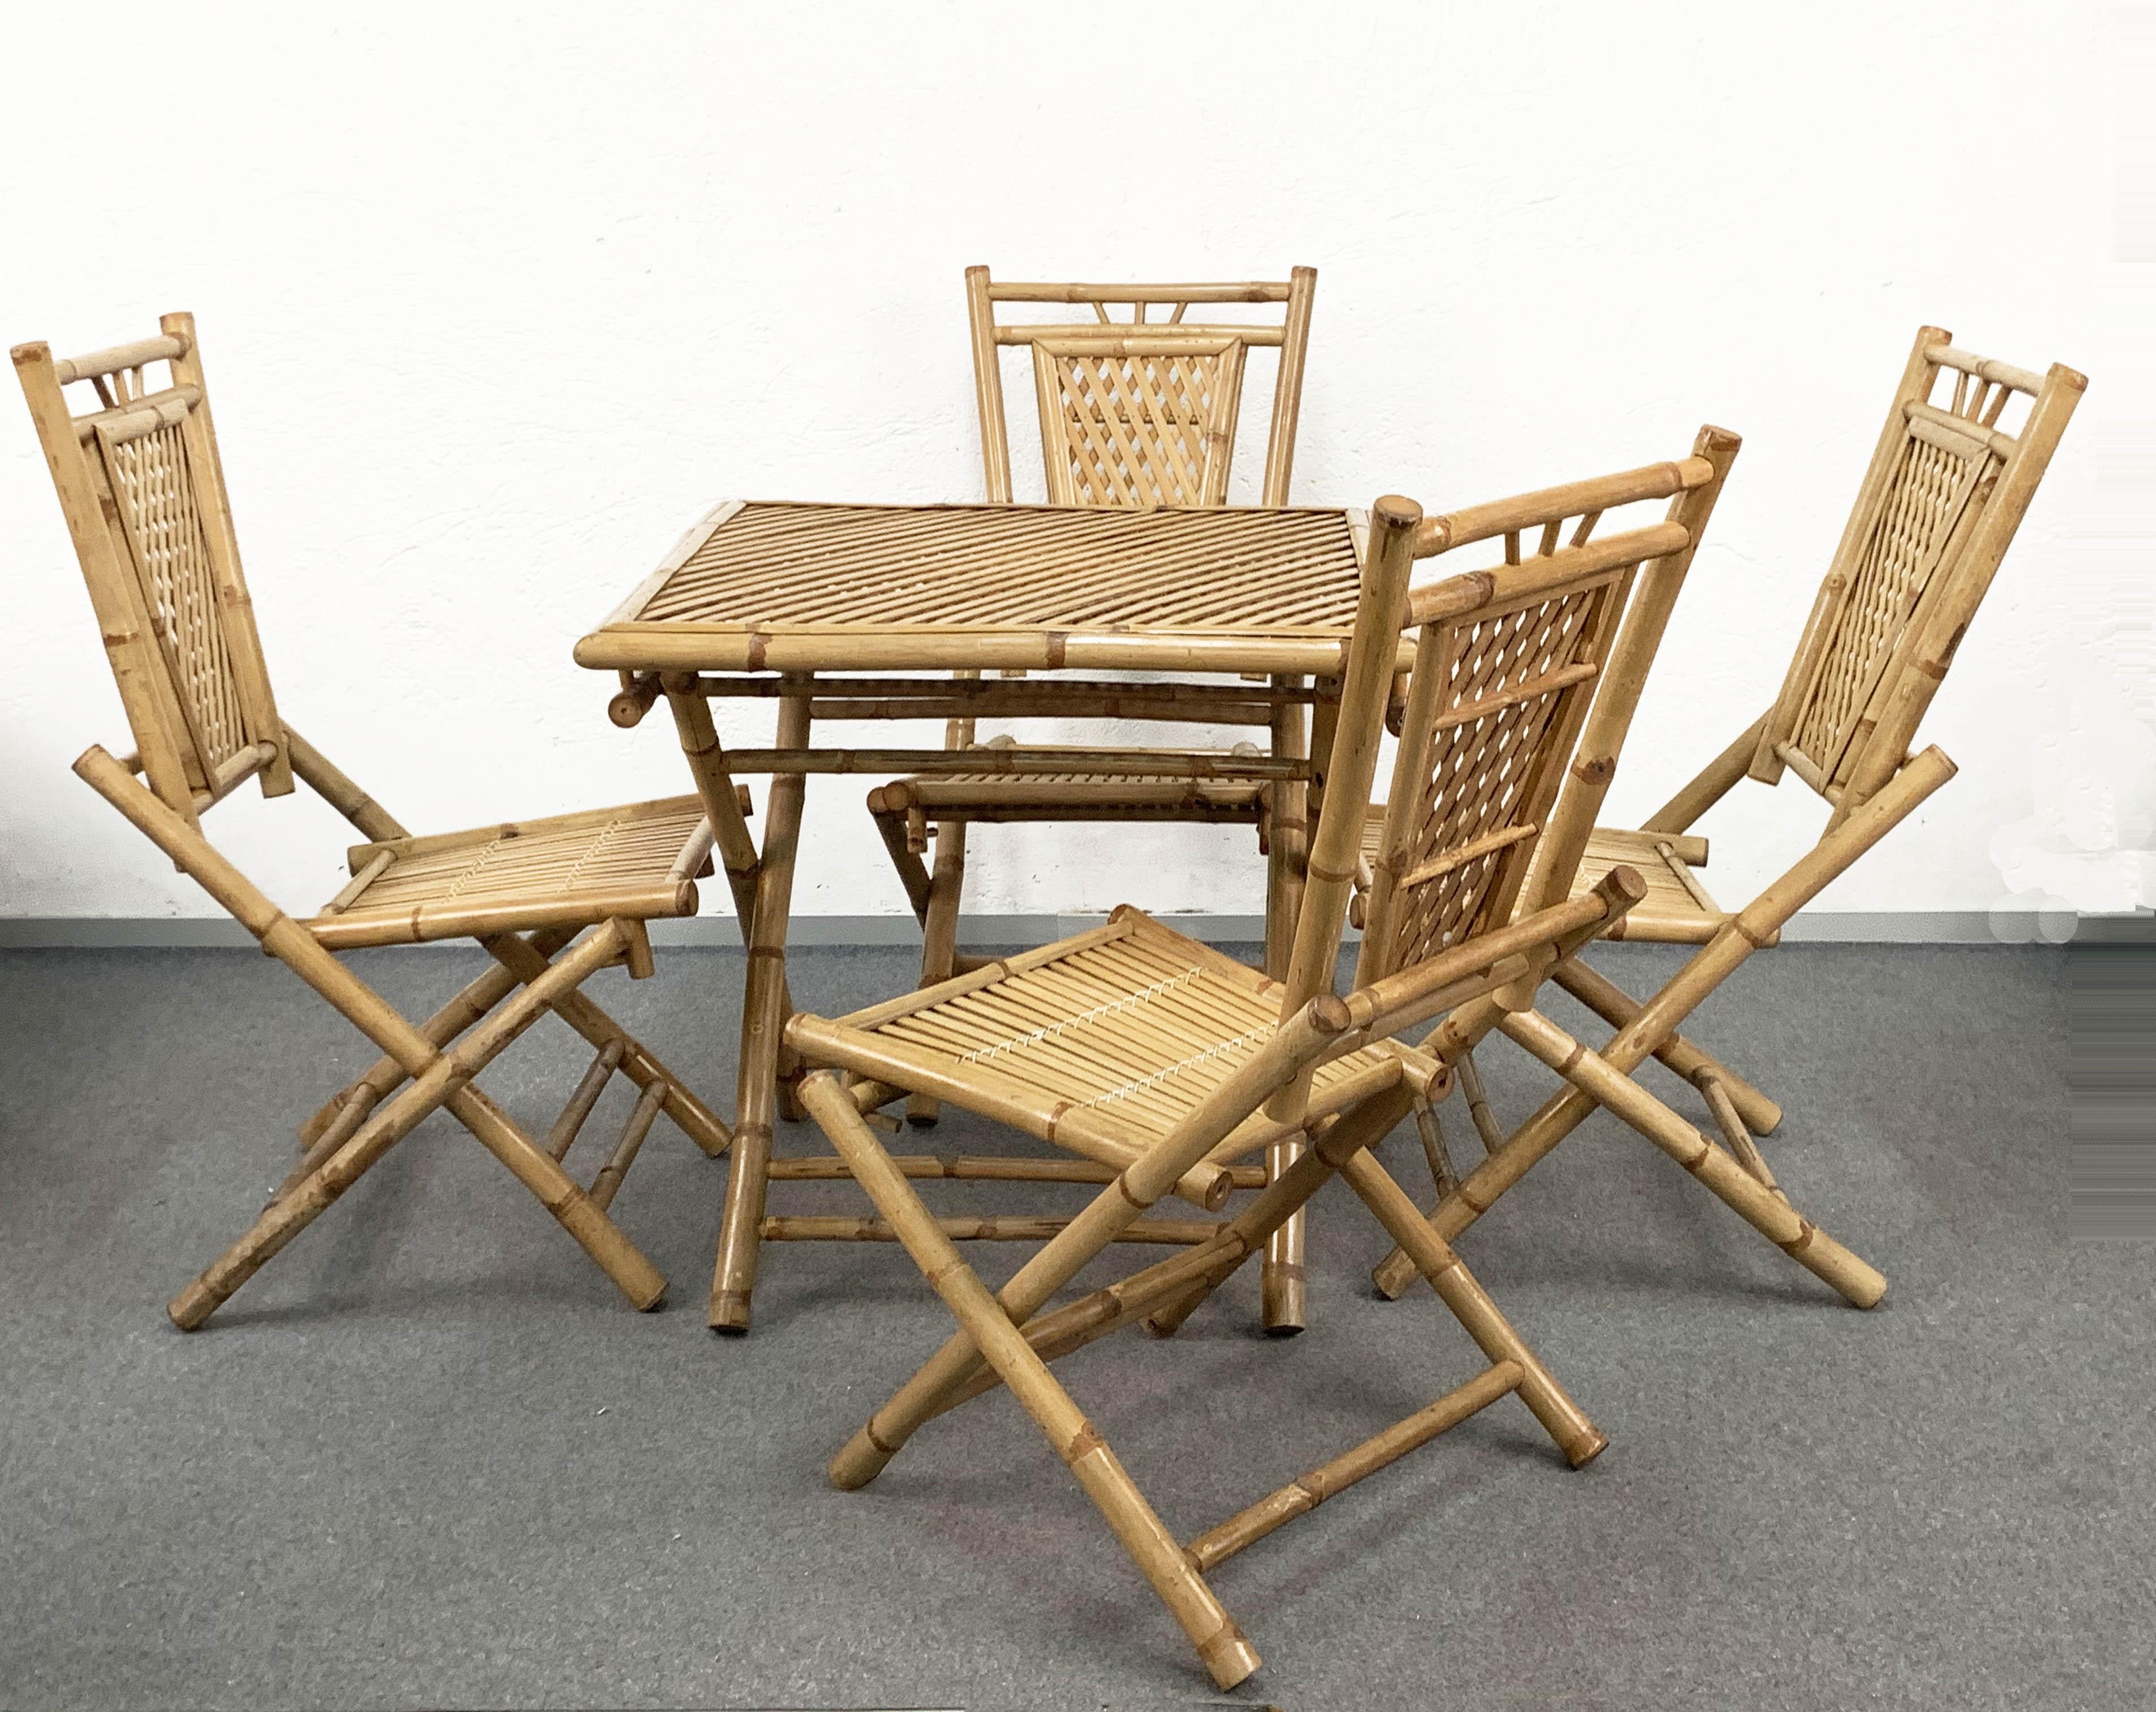 Beautiful midcentury set, made of bamboo and rattan foldable table and four chairs. It is an Italian production of 1960s and the state of conservation is just excellent.

The item is perfect both for inside and outside, and the foldable table